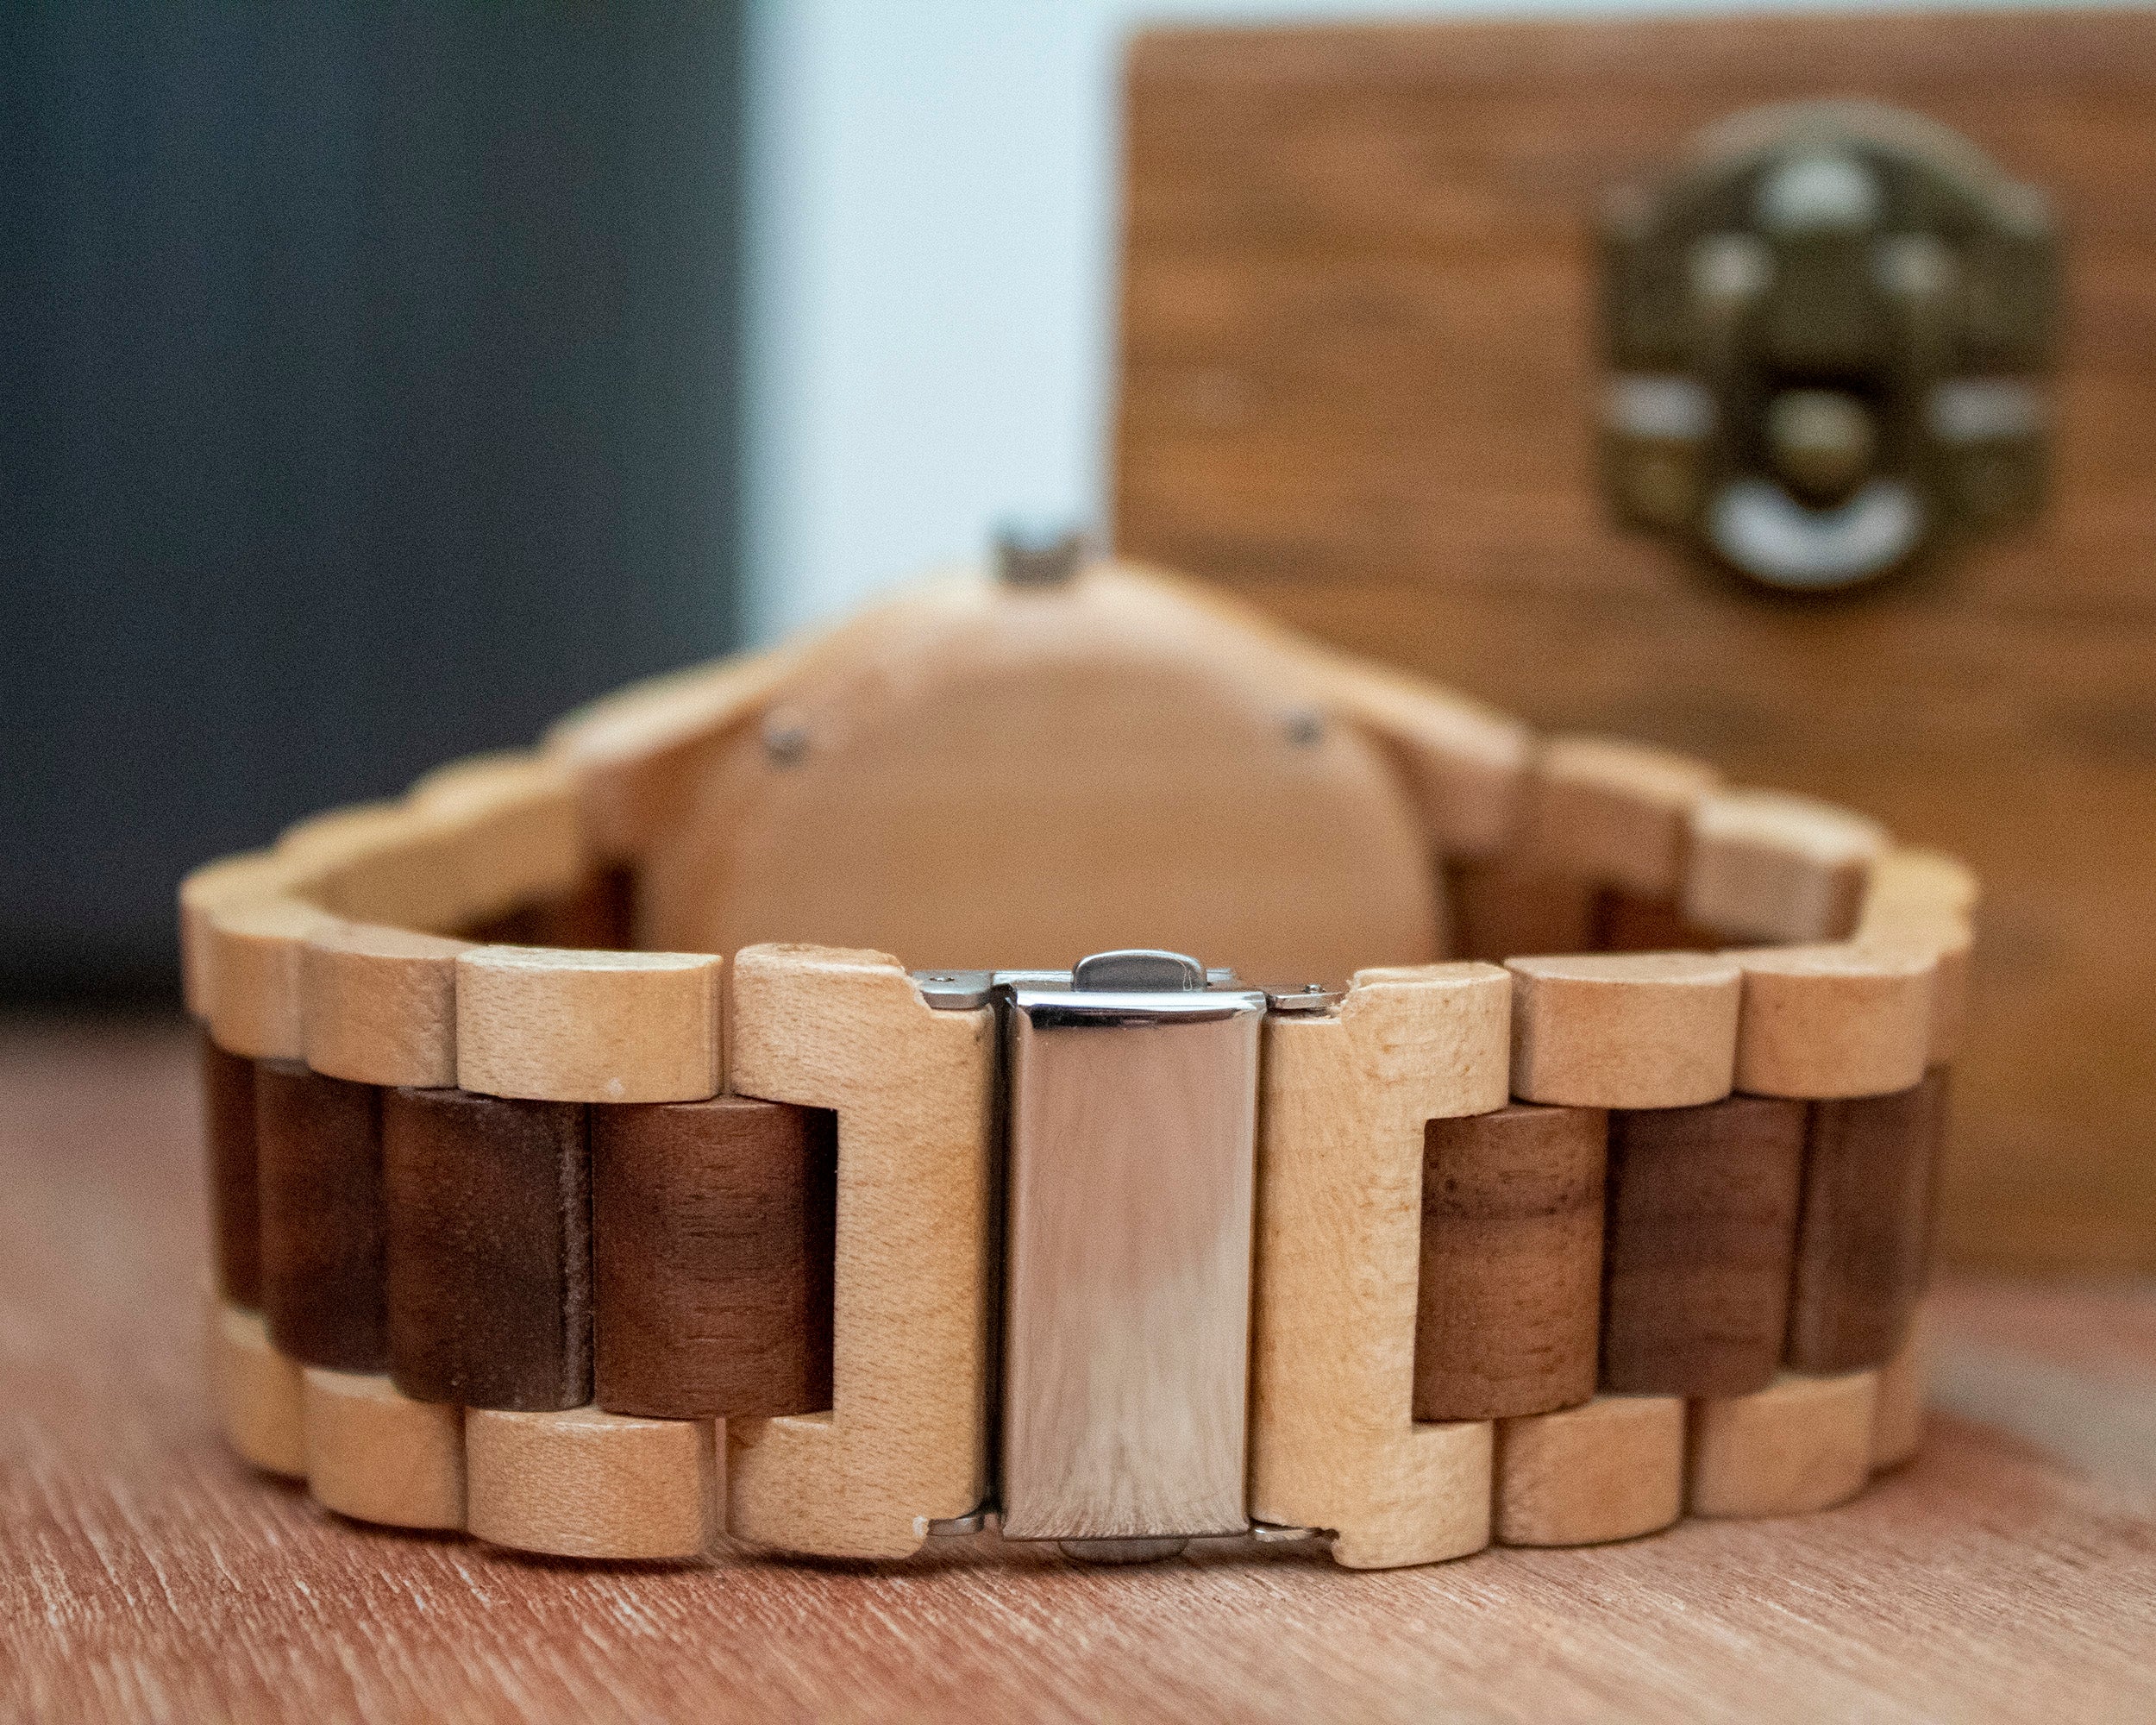 Elevate your style with the Galileo wooden watch - the perfect combination of unique style and everyday comfort. Made with real wood and a brushed silver buckle, this eco-friendly timepiece offers a comfortable fit for daily wear. Each watch comes in a beautiful box, making it a great gift or addition to your collection. Shop now!